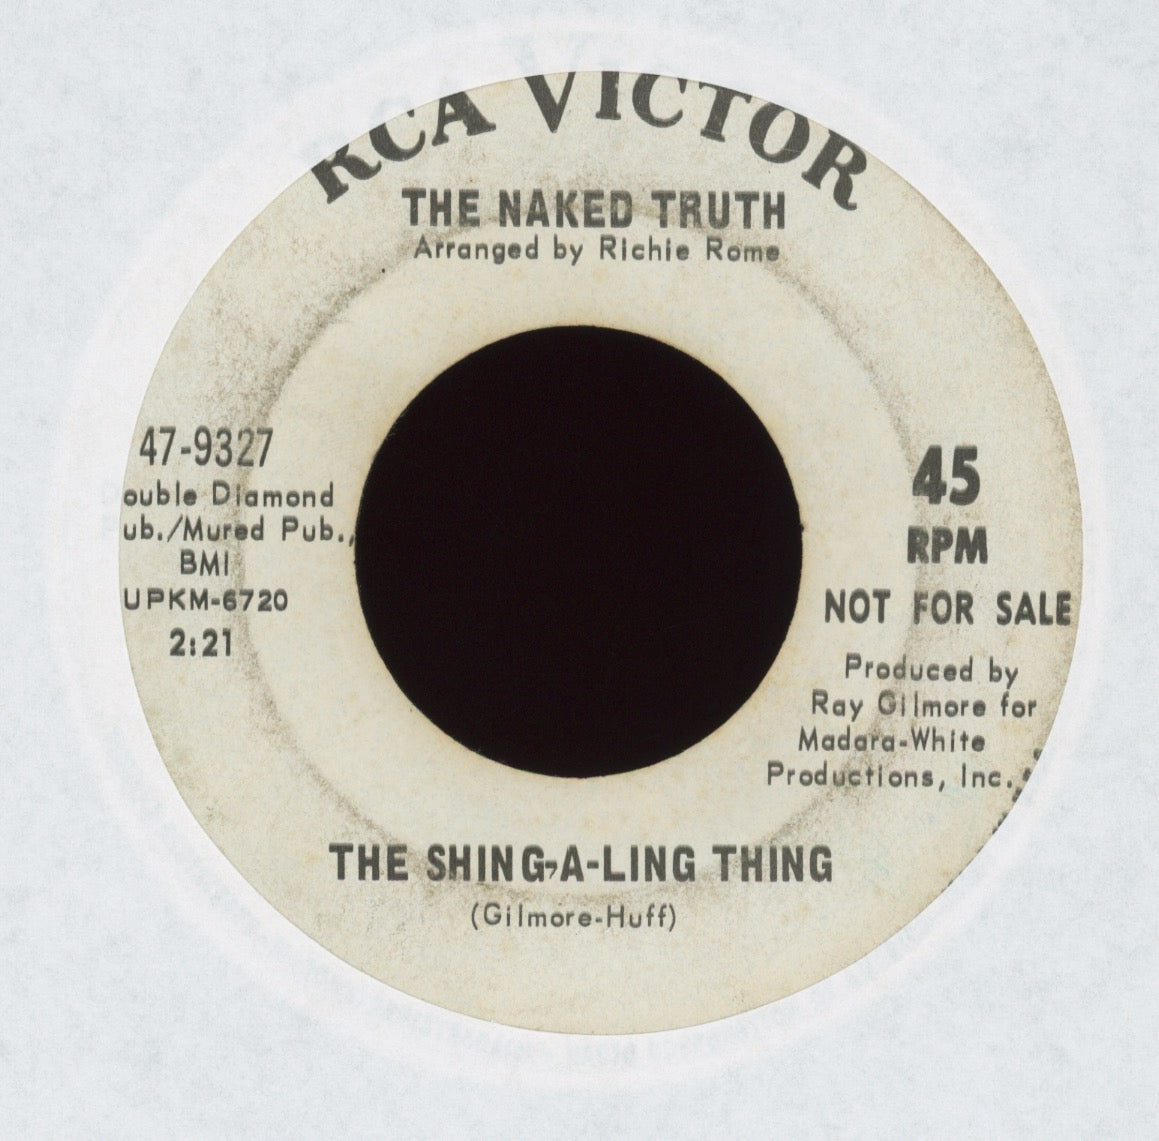 The Naked Truth - The Stripper / The Shing-A-Ling Thing on RCA Promo